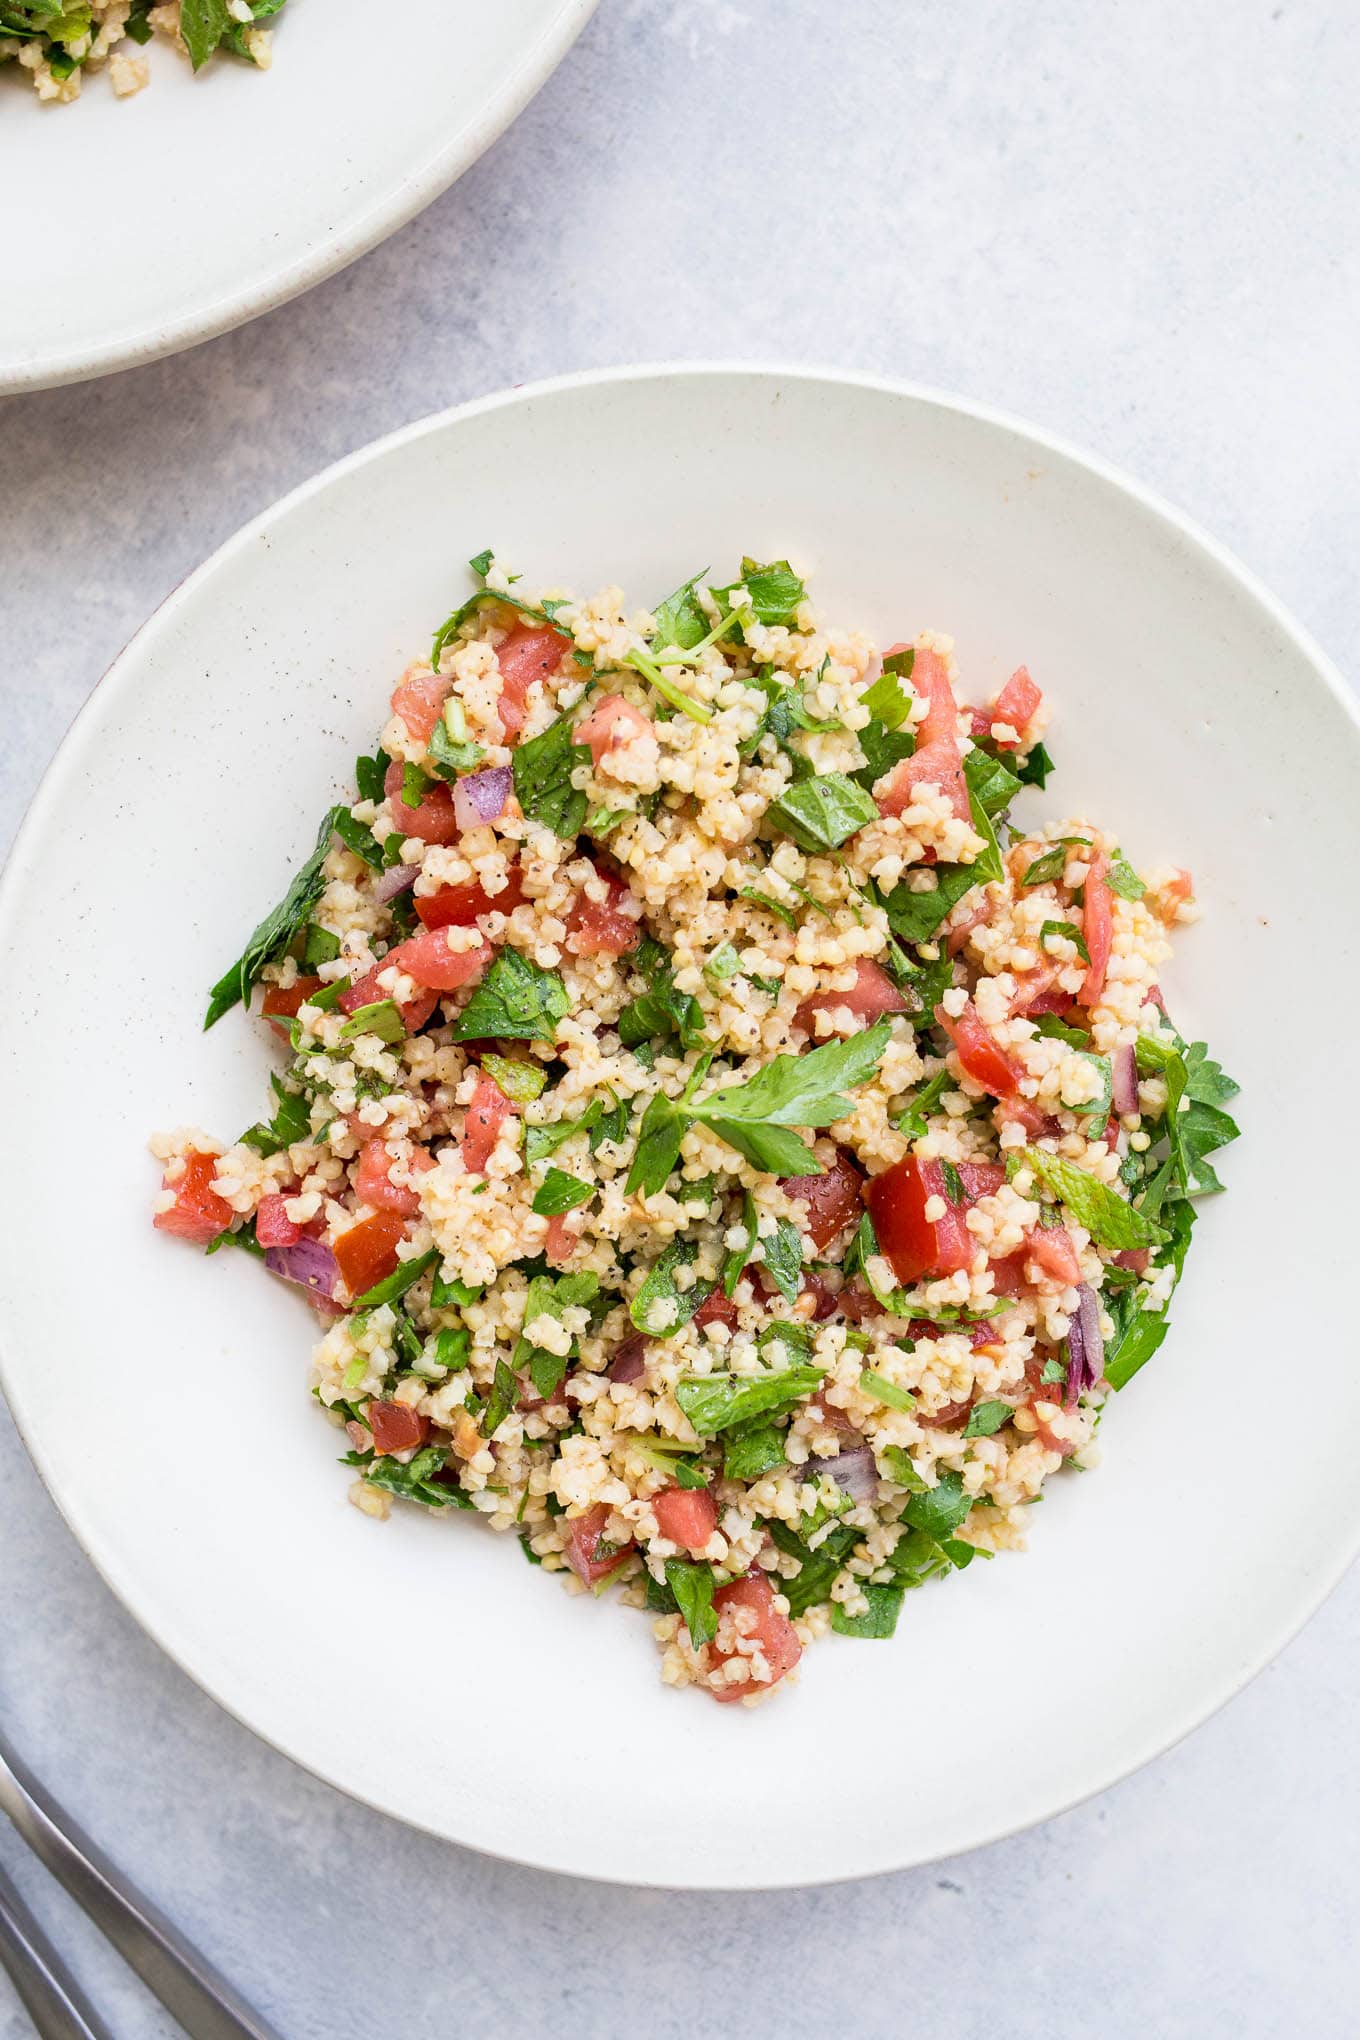 Millet Tabbouleh Salad is an easy variation on the traditional recipe. Made gluten-free with whole grain millet.